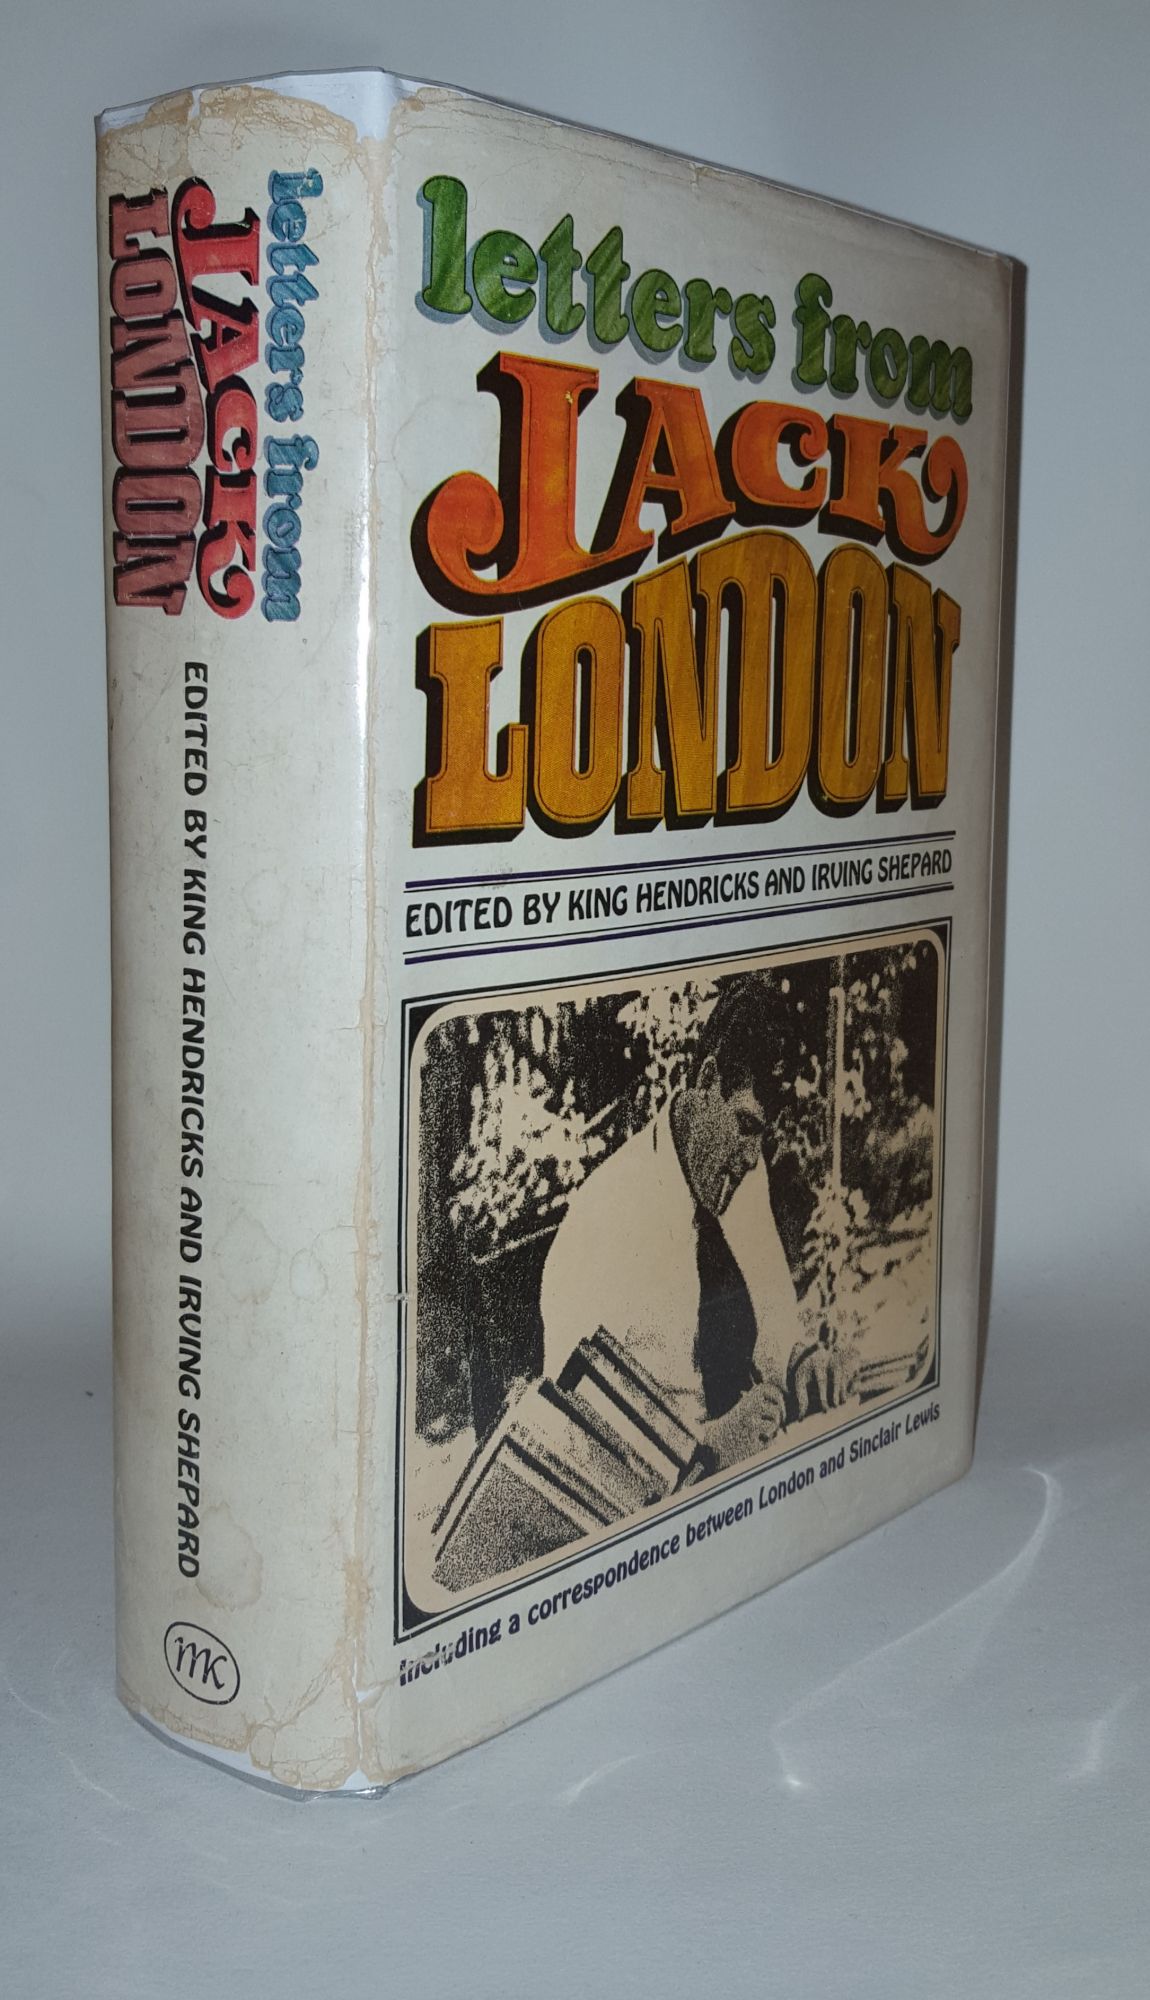 LONDON Jack, HENDRICKS King, SHEPARD Irving - Letters from Jack London Containing an Unpublished Correspondence between Jack London and Sinclair Lewis